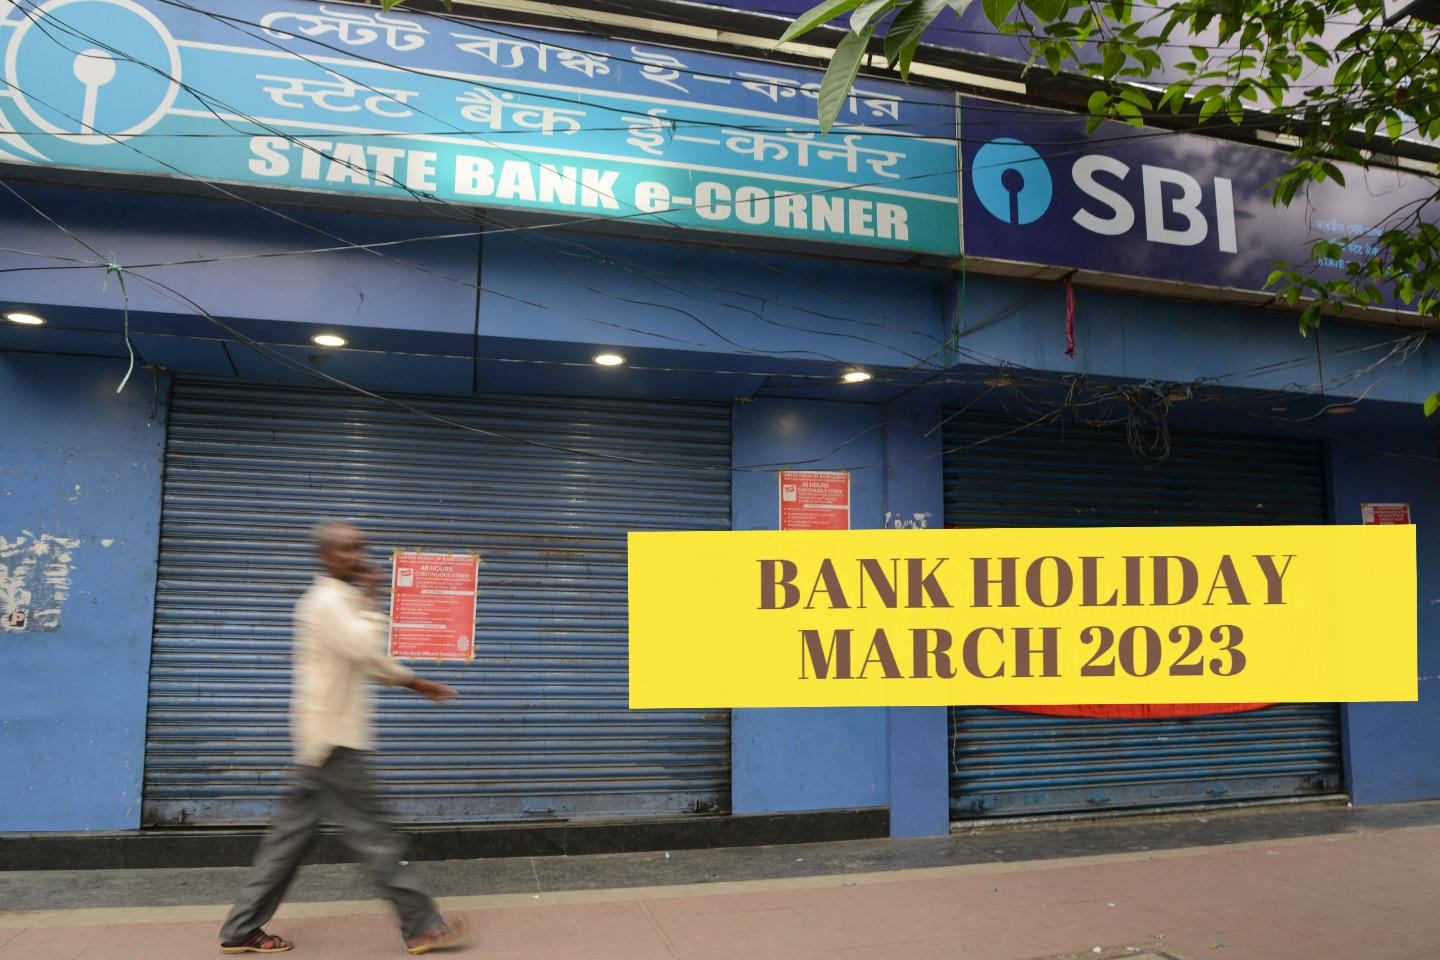 Bank Holidays in March 2023 Banks in Telangana will be closed for 9